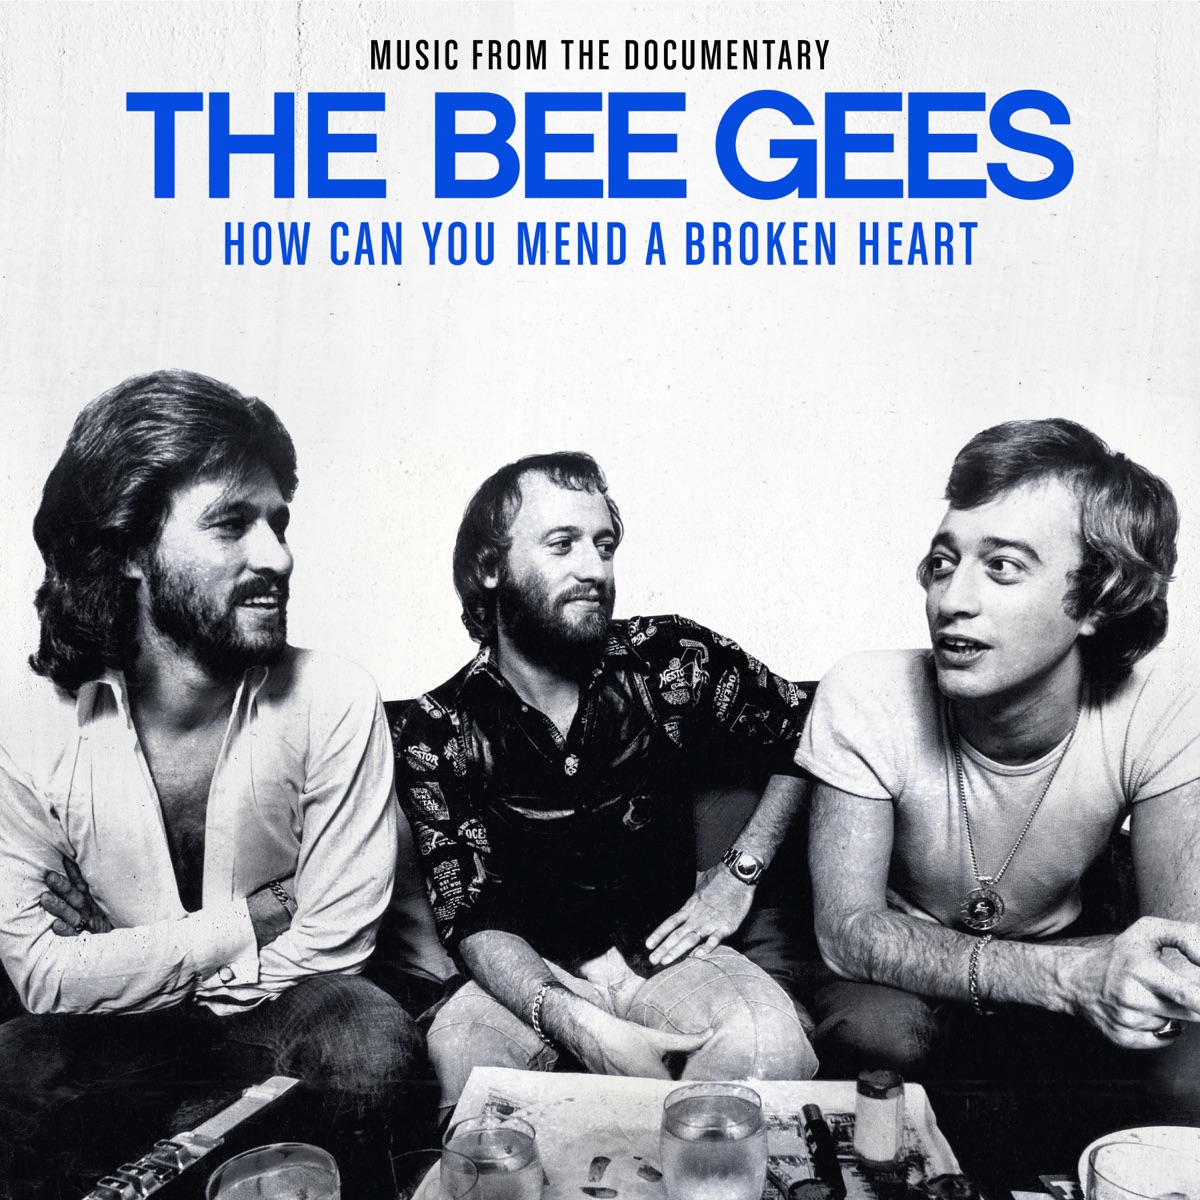 How Can You Mend A Broken Heart - Album by Bee Gees - Apple Music